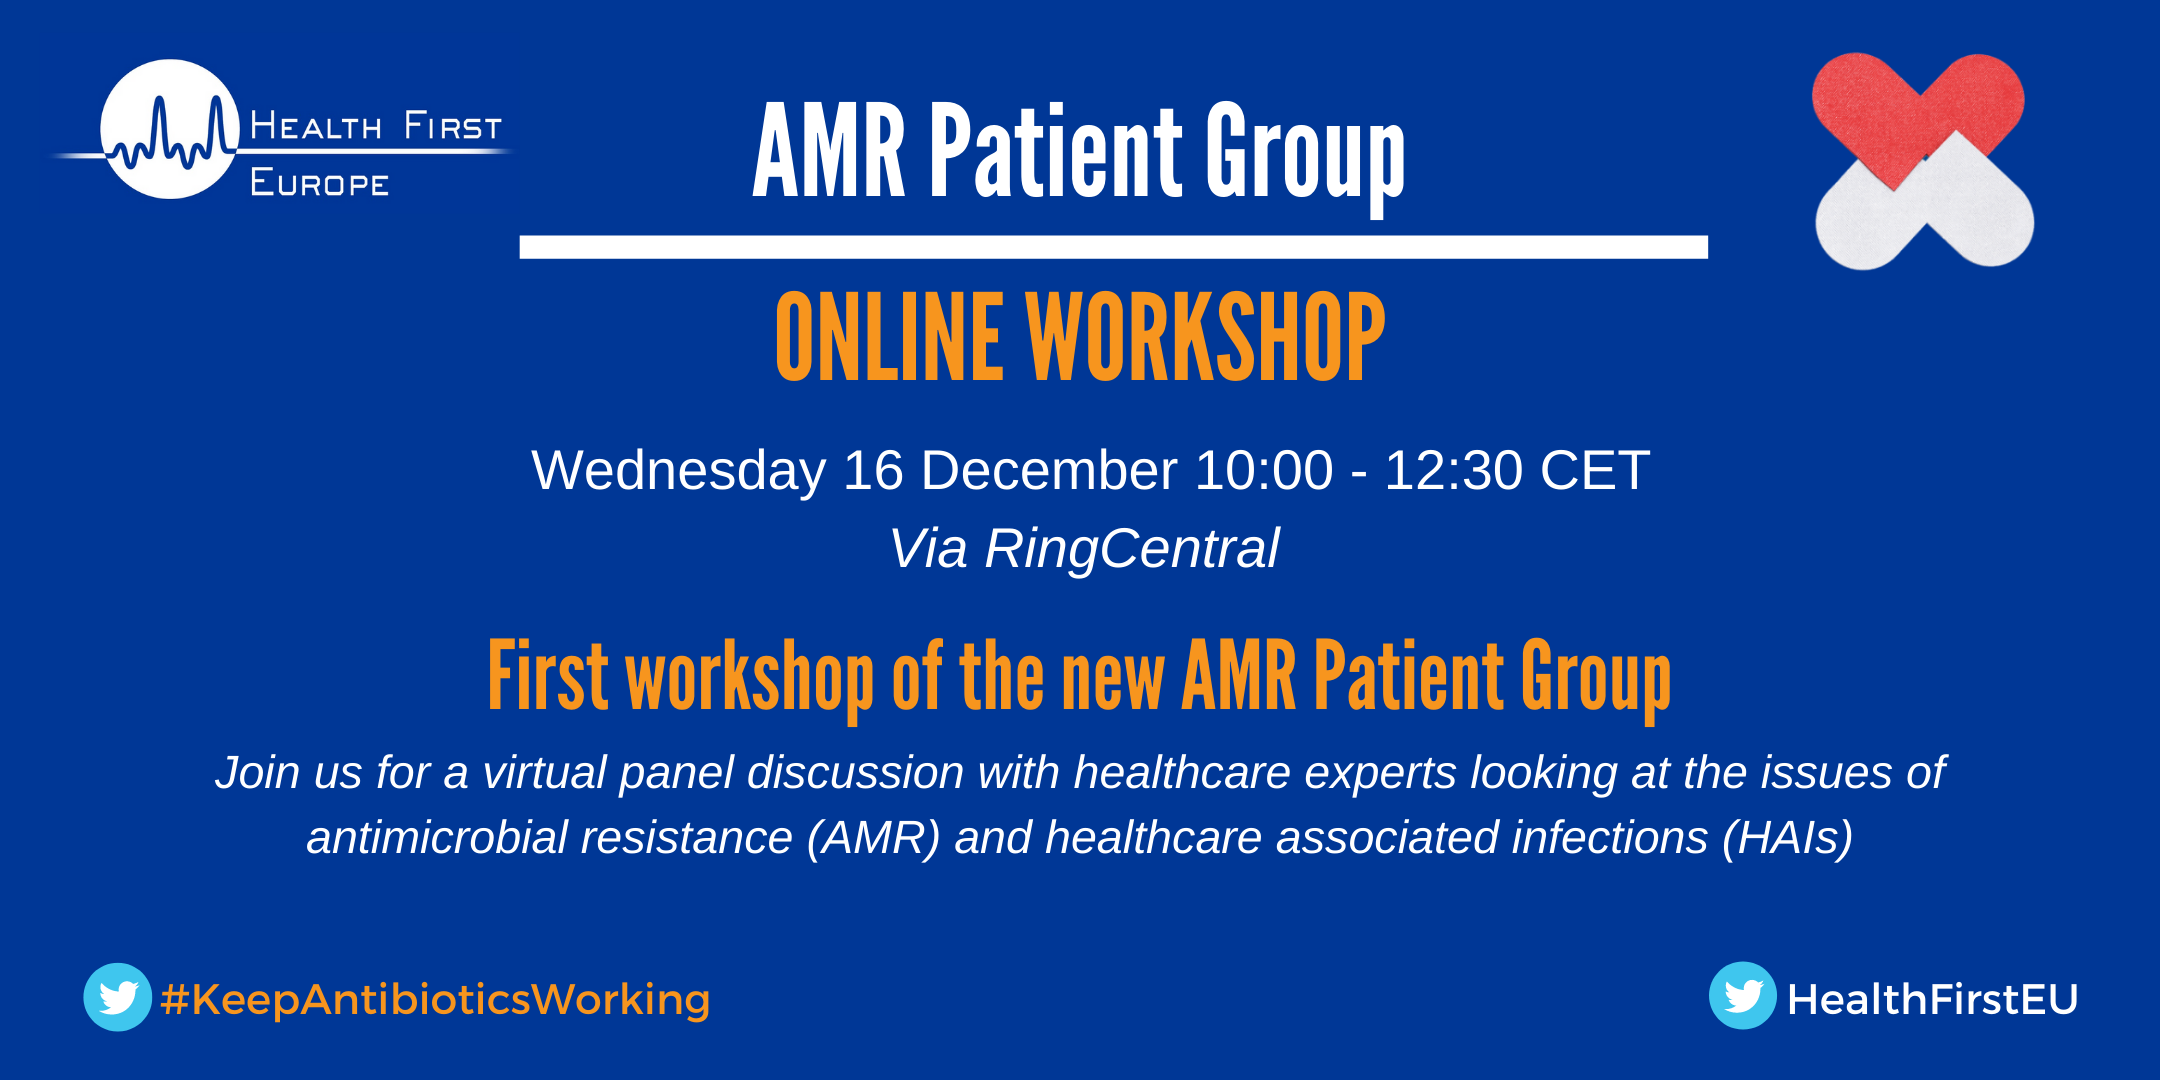 First Workshop of the AMR Patient Group